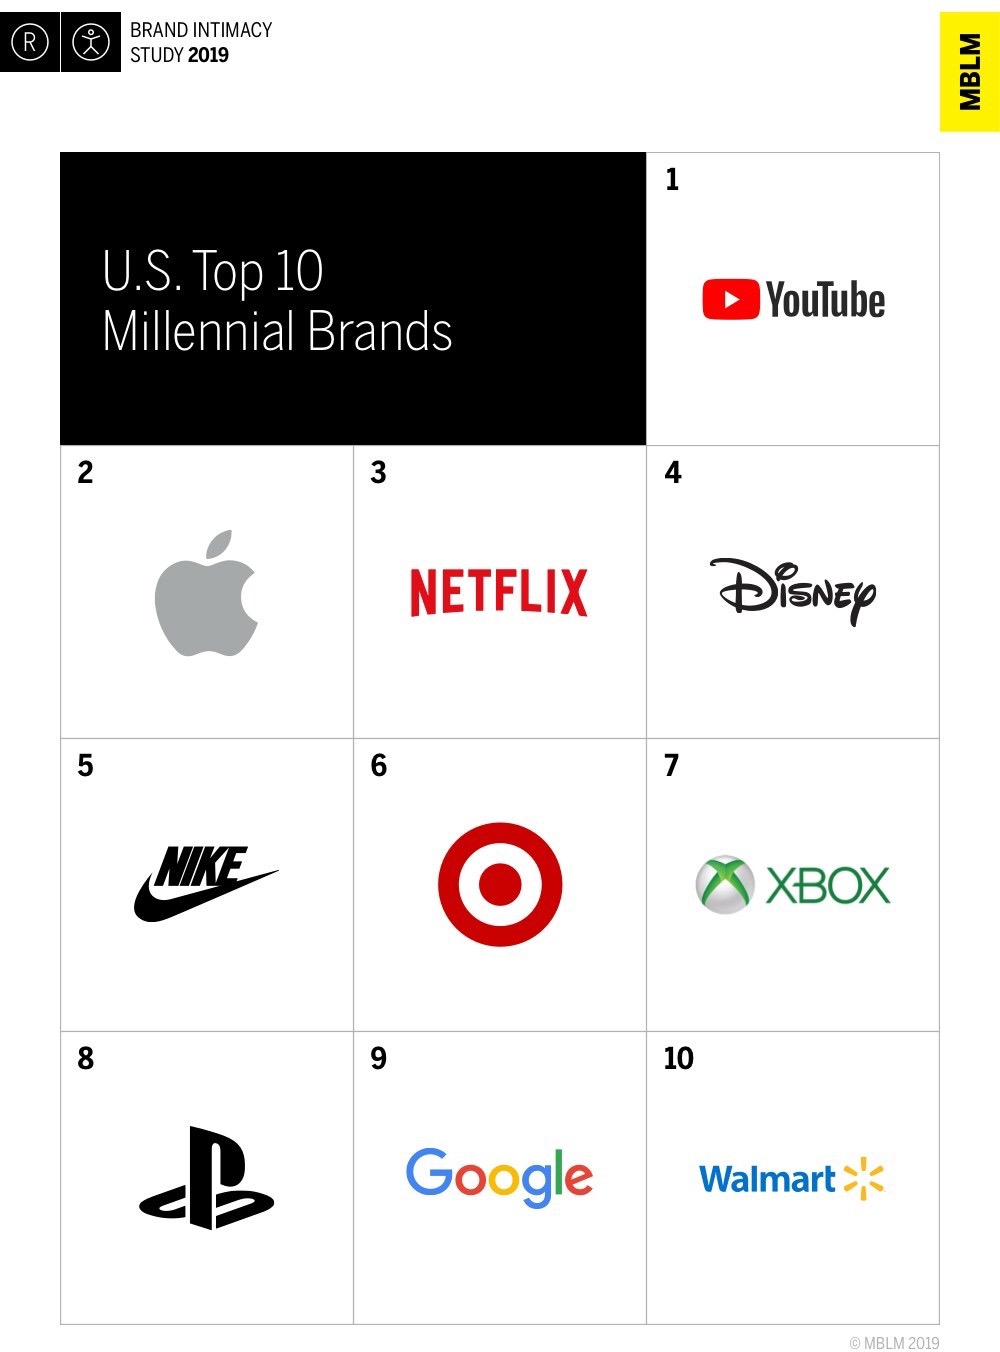 Apple loses leadership to YouTube in ranking of more "intimate" brand